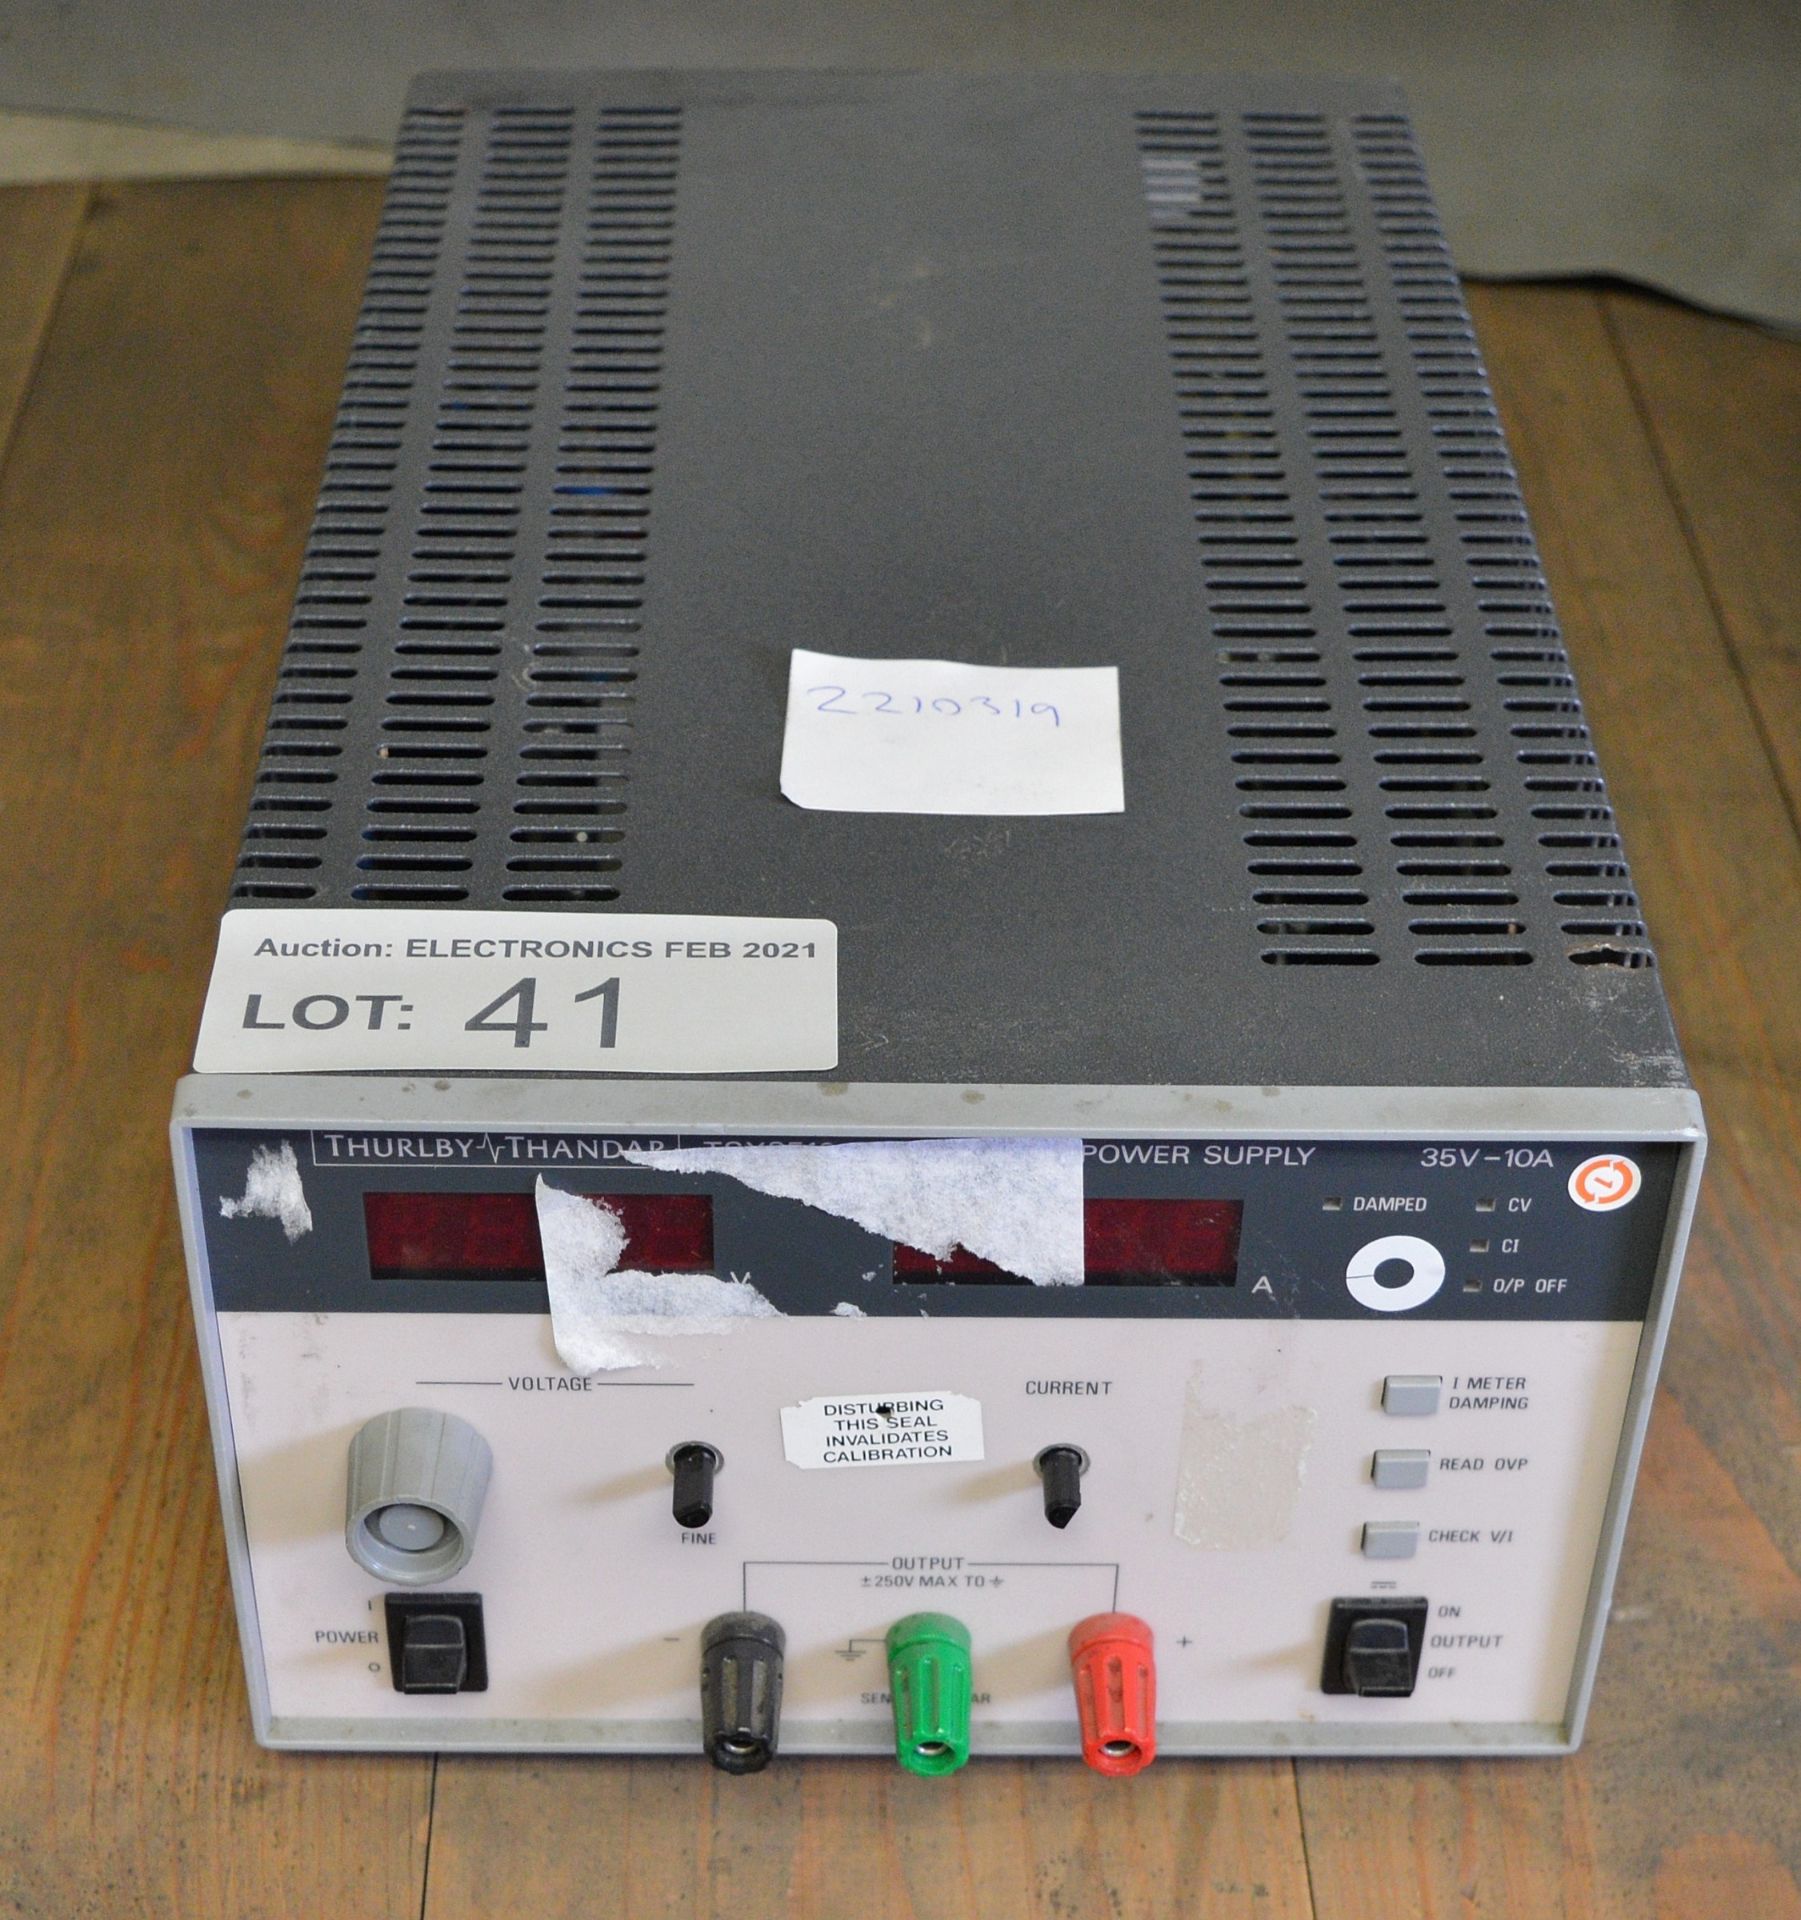 Thurlby Thandar TSX3510 Precision DC Power Supply - 35v-10A (Missing Voltage Fine & Curren - Image 2 of 3